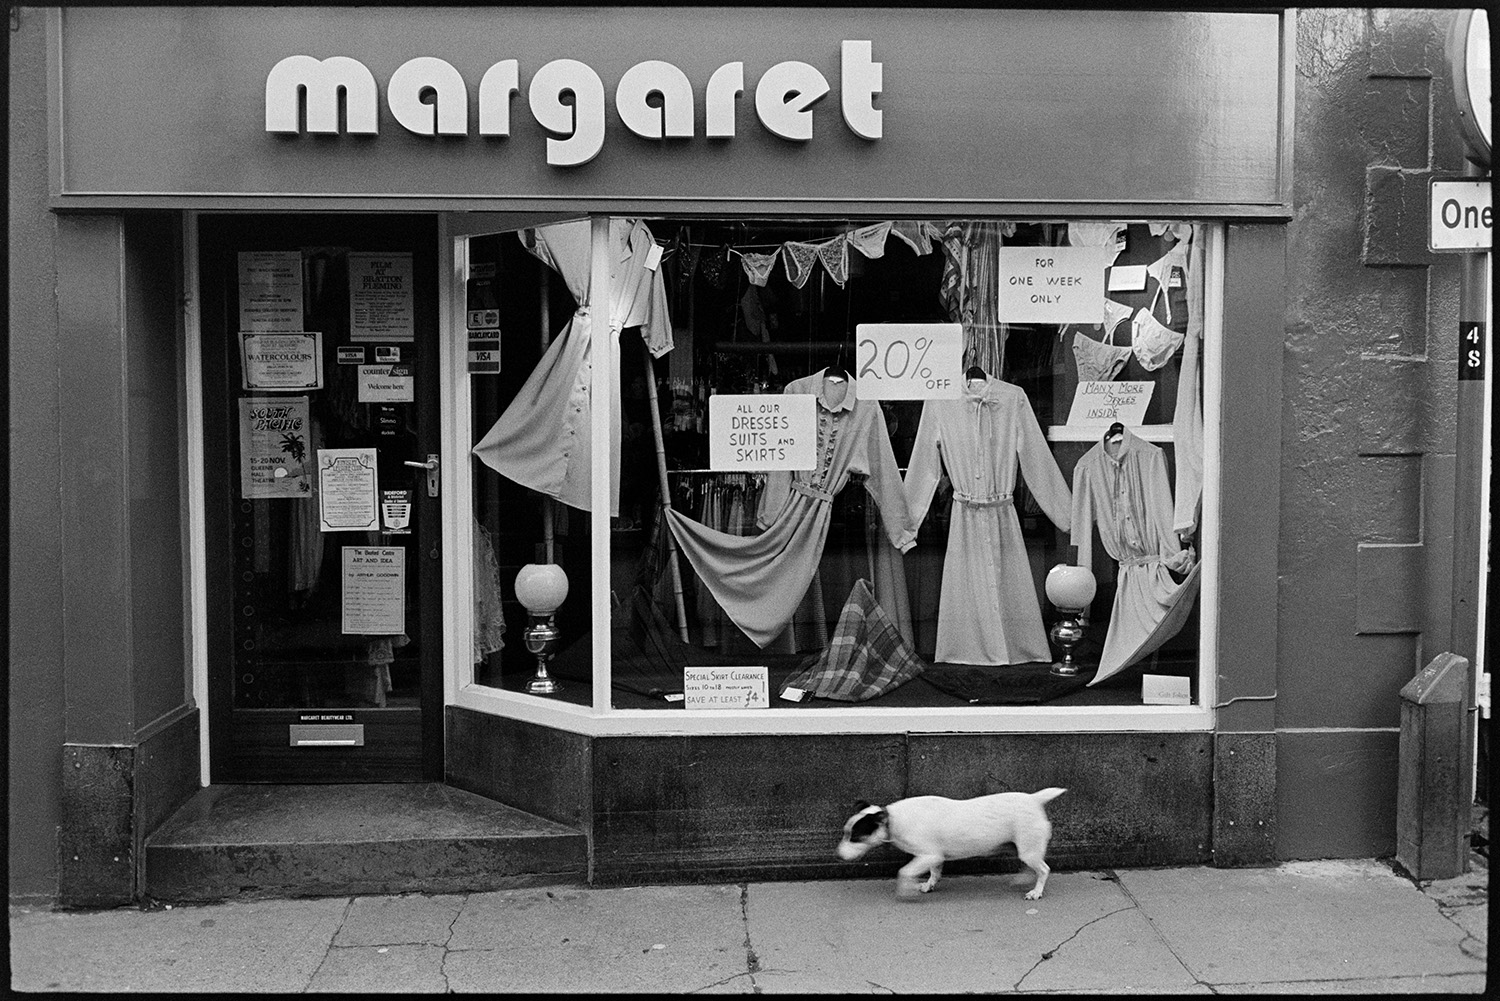 Street scenes with shop fronts, window display of clothes shop. 
[A dog walking past the shop front of 'Margaret' in Mill Street, Bideford. Clothes are displayed in the shop window along with signs advertising 20% off in the shop.]